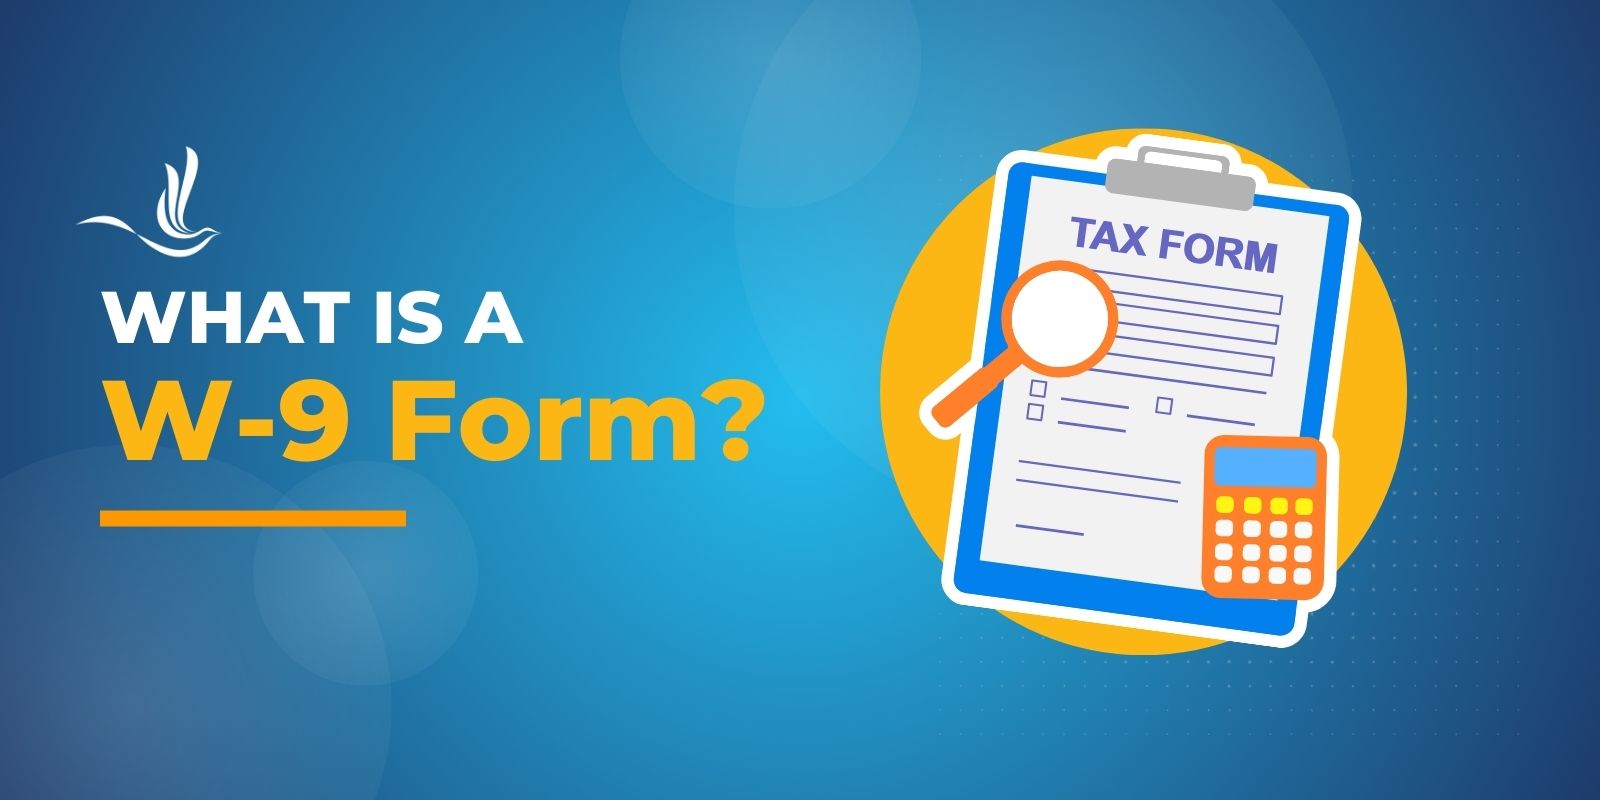 what is a w-9 form